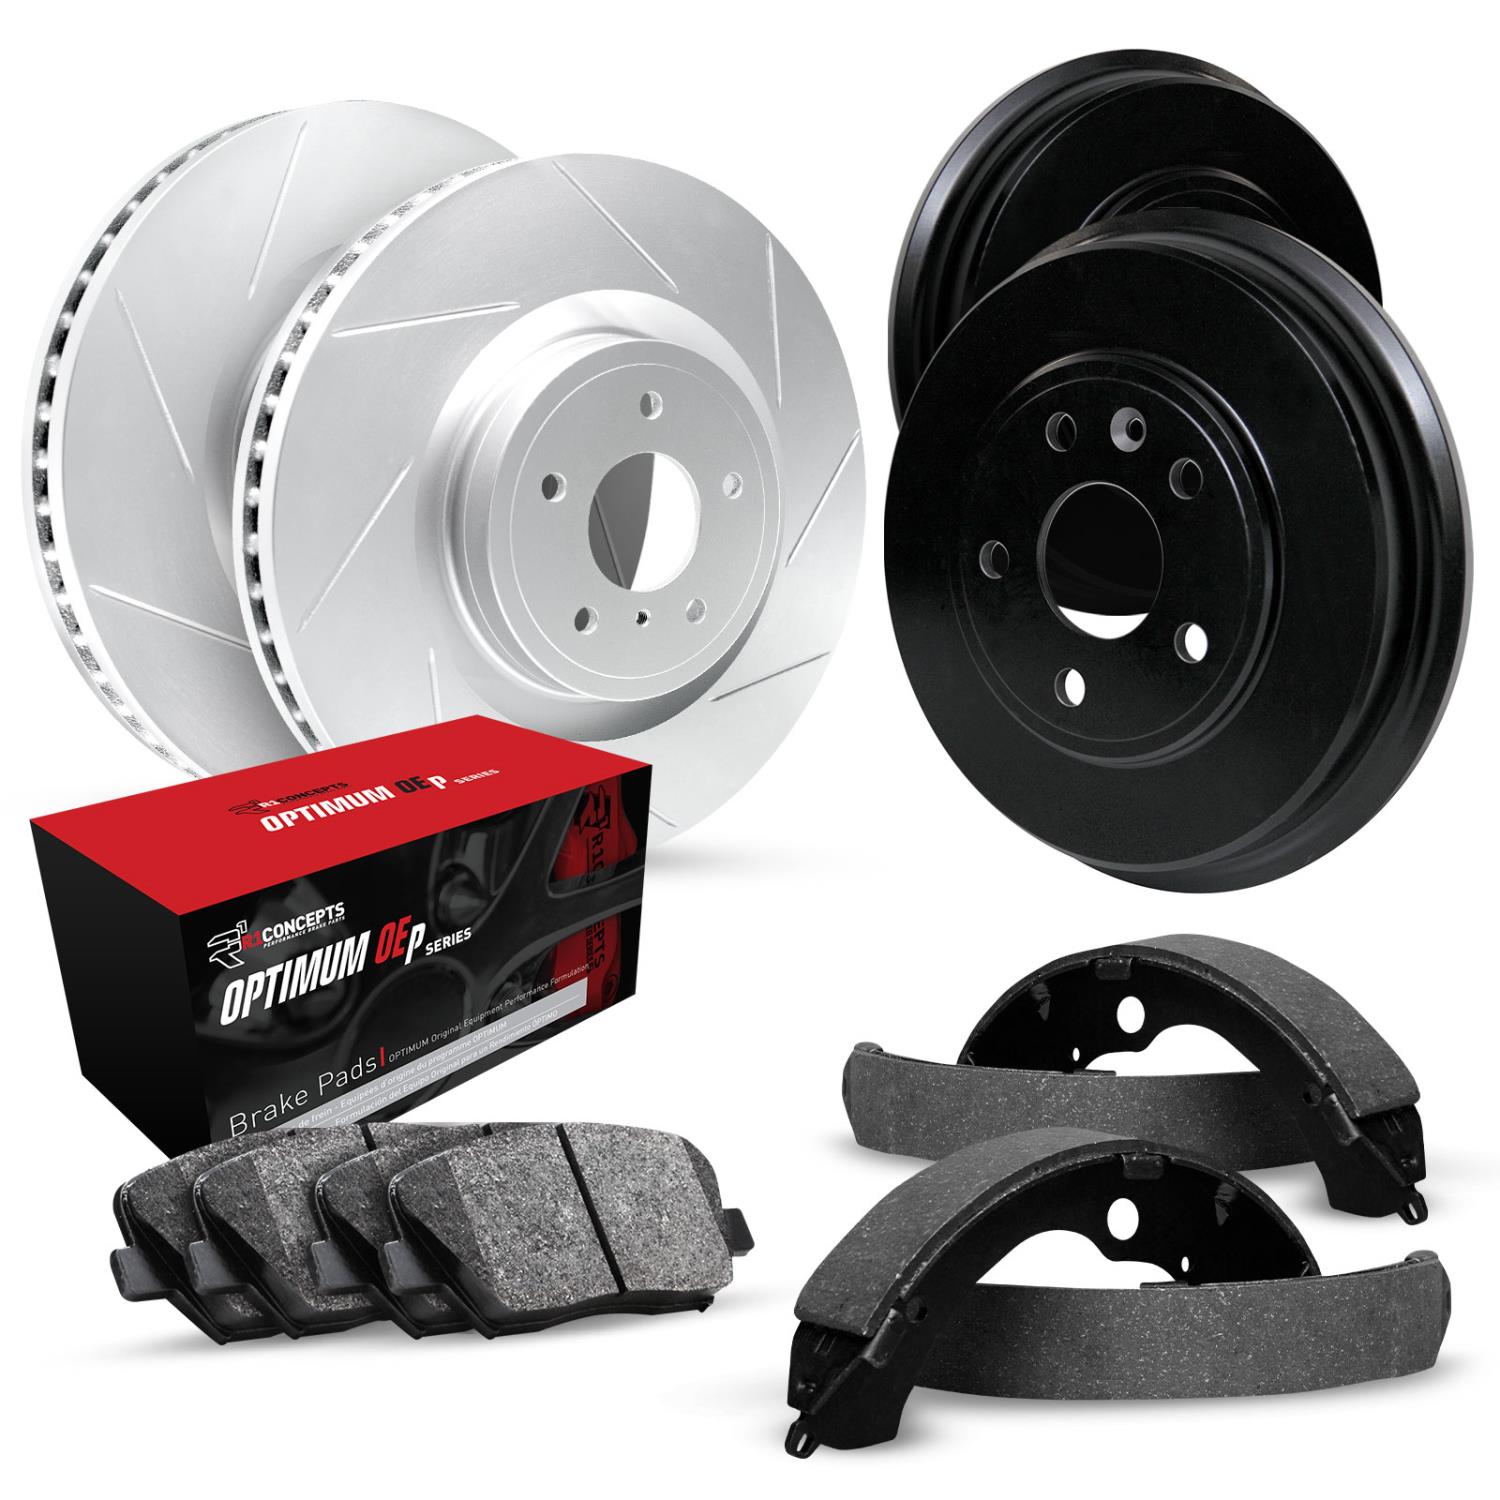 GEO-Carbon Slotted Brake Rotor & Drum Set w/Optimum OE Pads & Shoes, 2003-2008 Fits Multiple Makes/Models